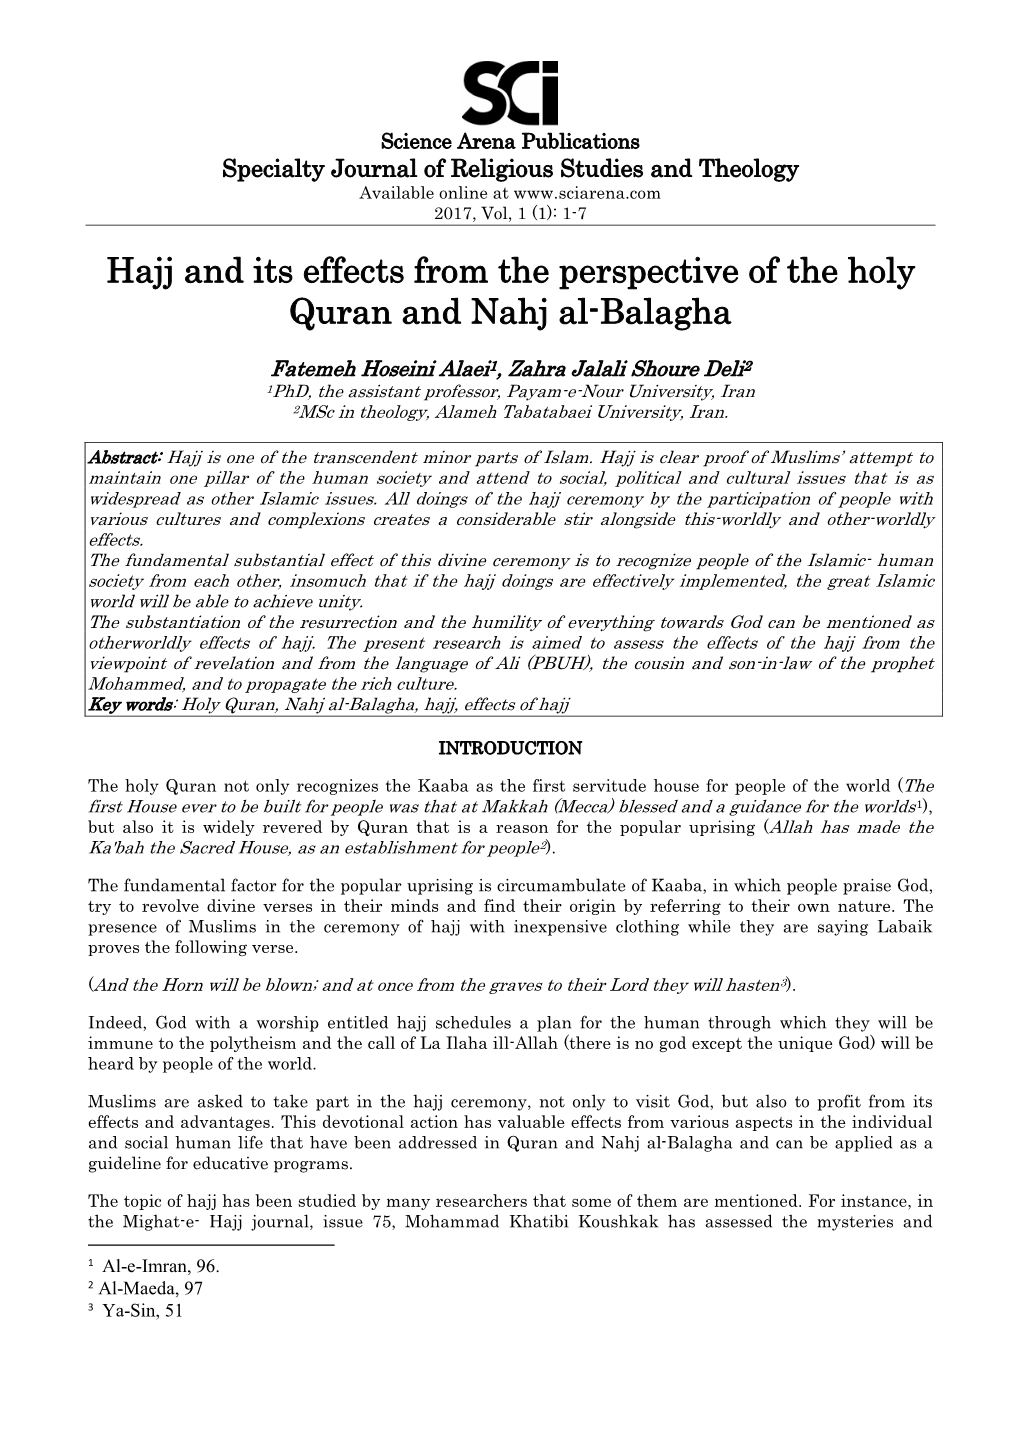 Hajj and Its Effects from the Perspective of the Holy Quran and Nahj Al-Balagha